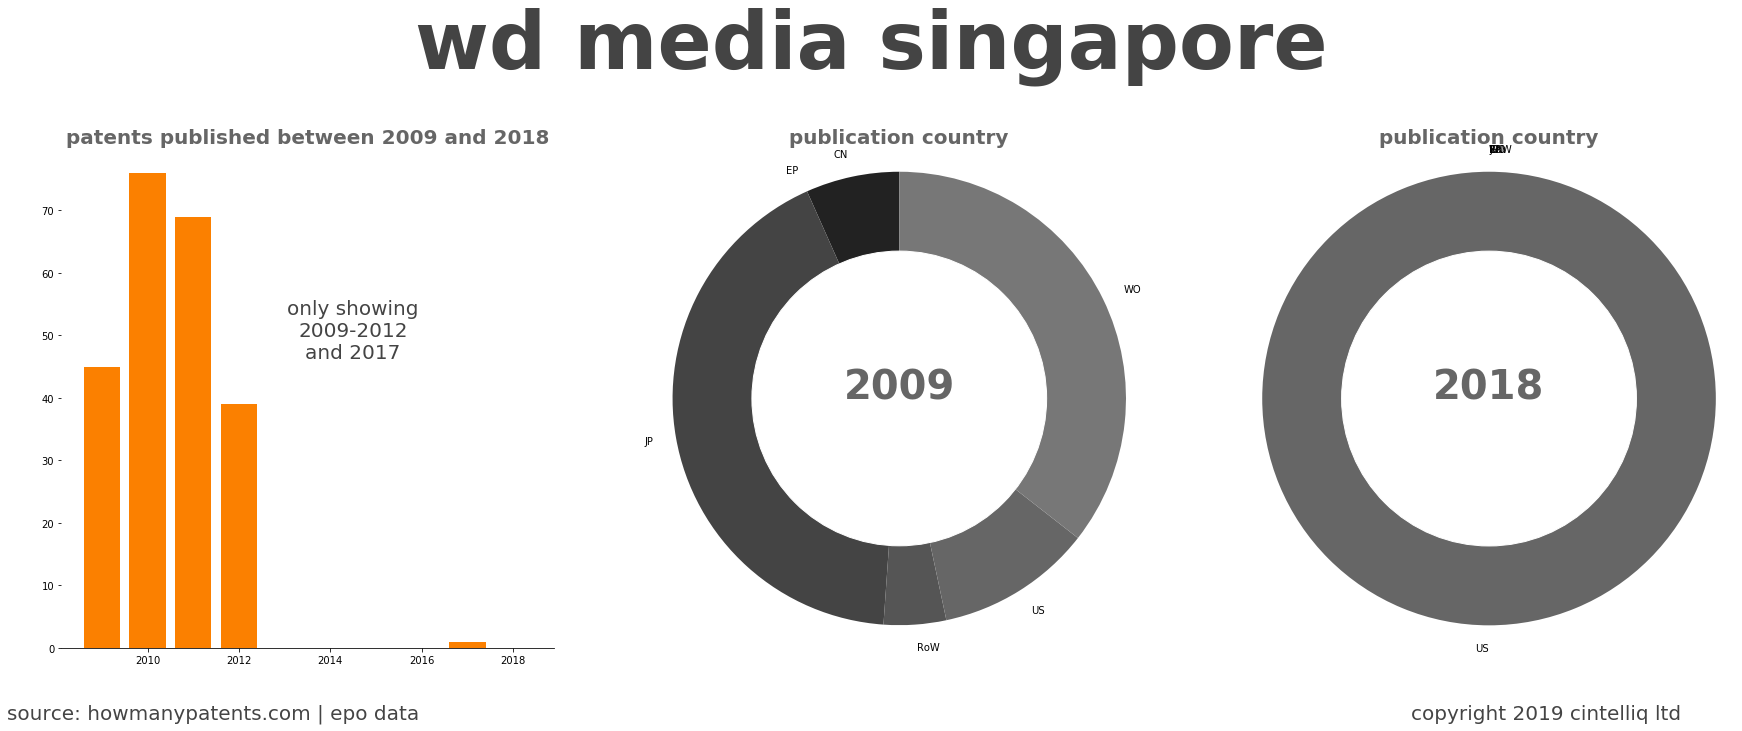 summary of patents for Wd Media Singapore